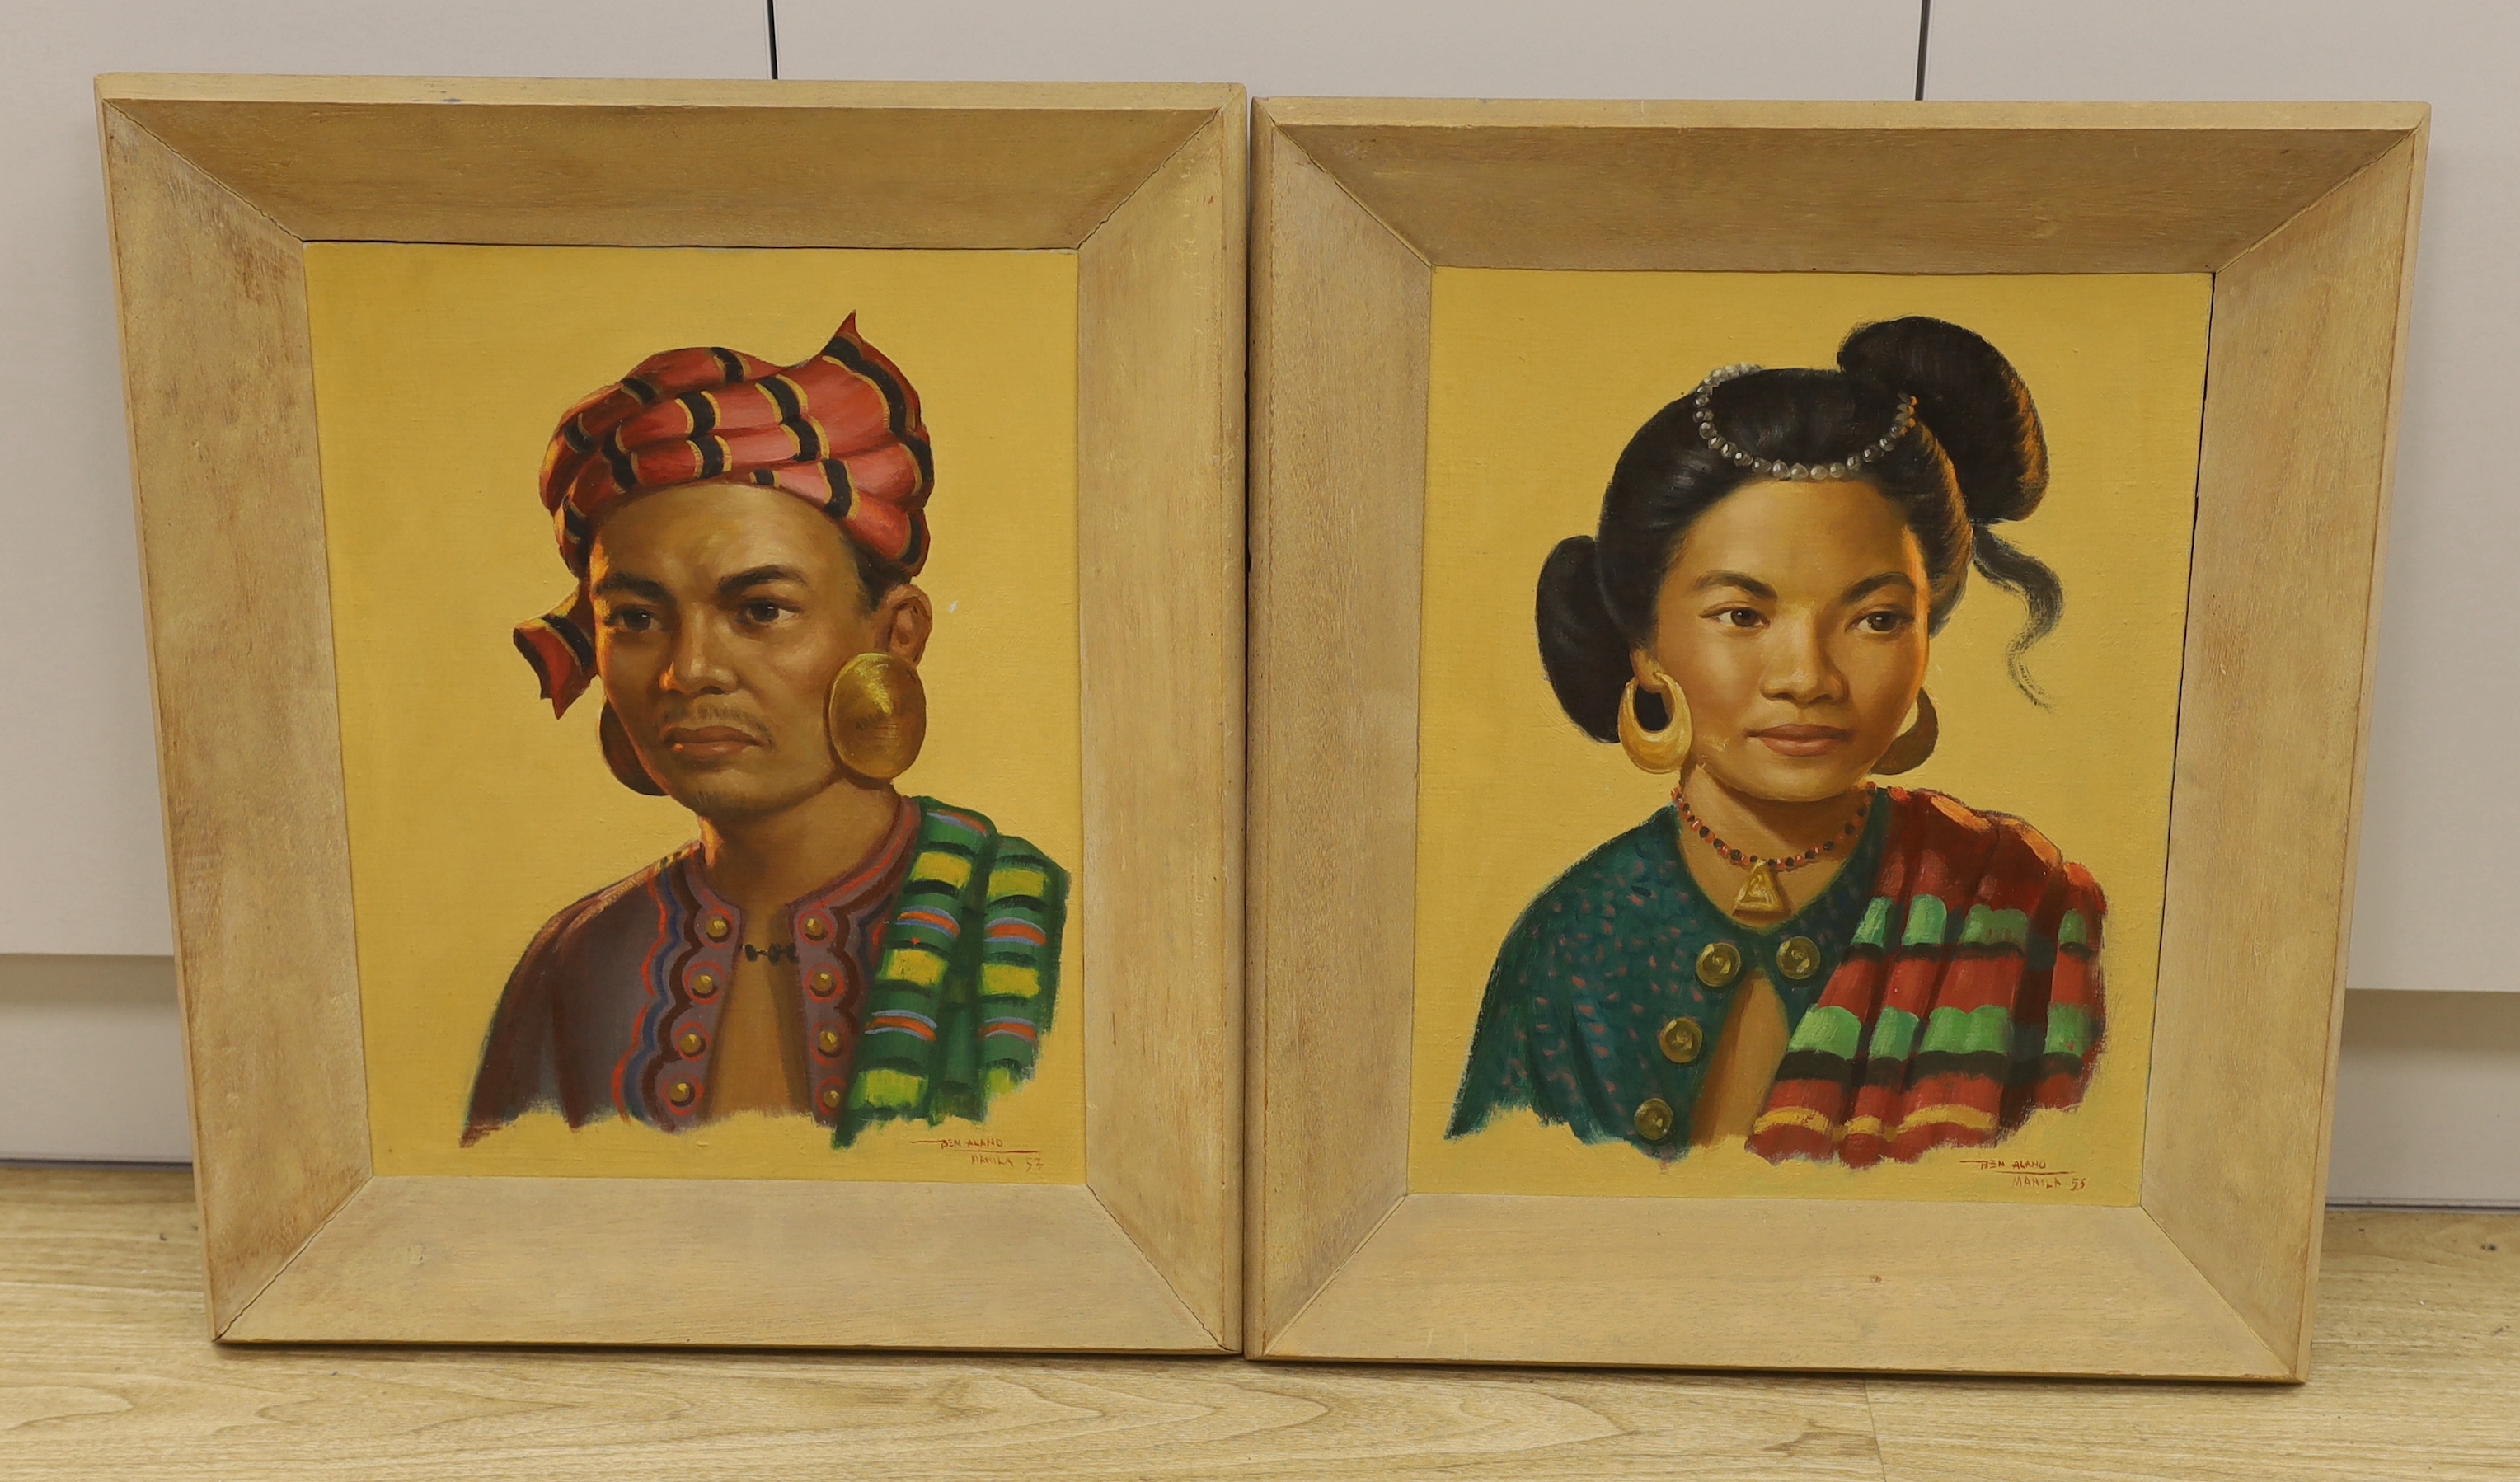 Ben Alano (Philipino 1920 - 1991) pair of oil on boards, Portraits of a lady and gentleman wearing traditional dress, possibly members of the Royal family, signed and inscribed Manila, 44 x 34cm